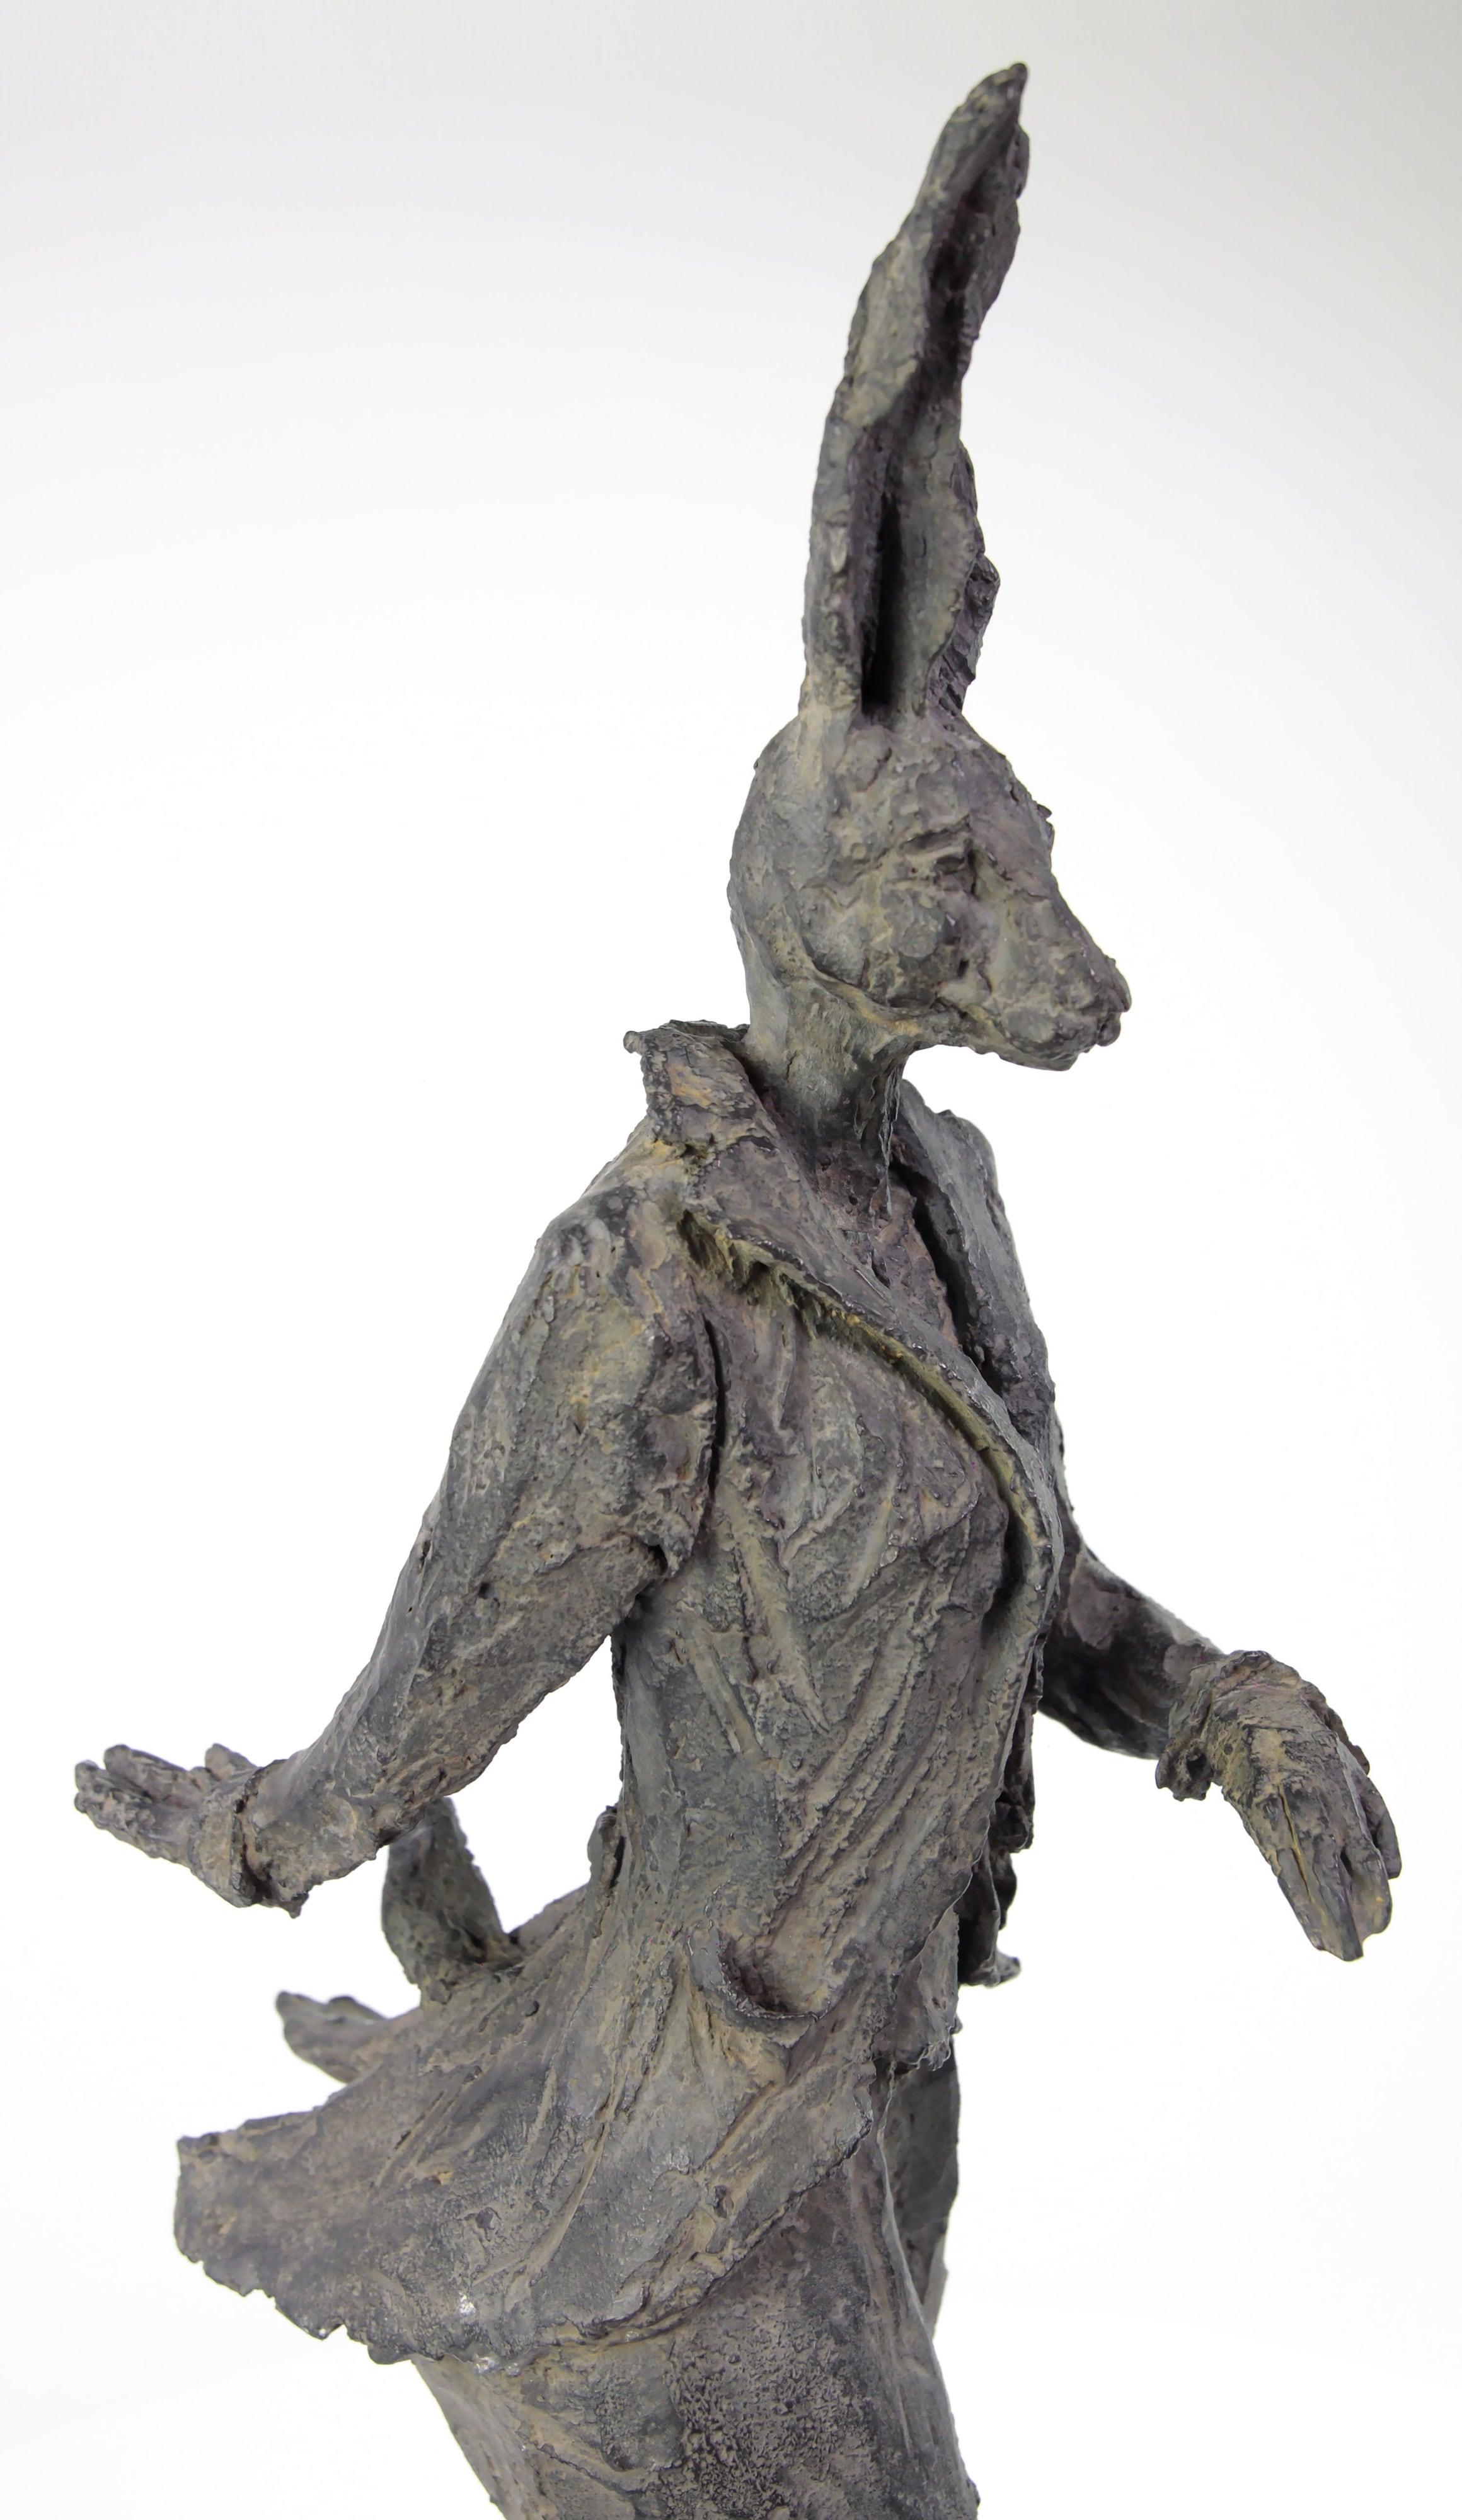 Walking Hare - Balance - Contemporary Sculpture by Cécile Raynal